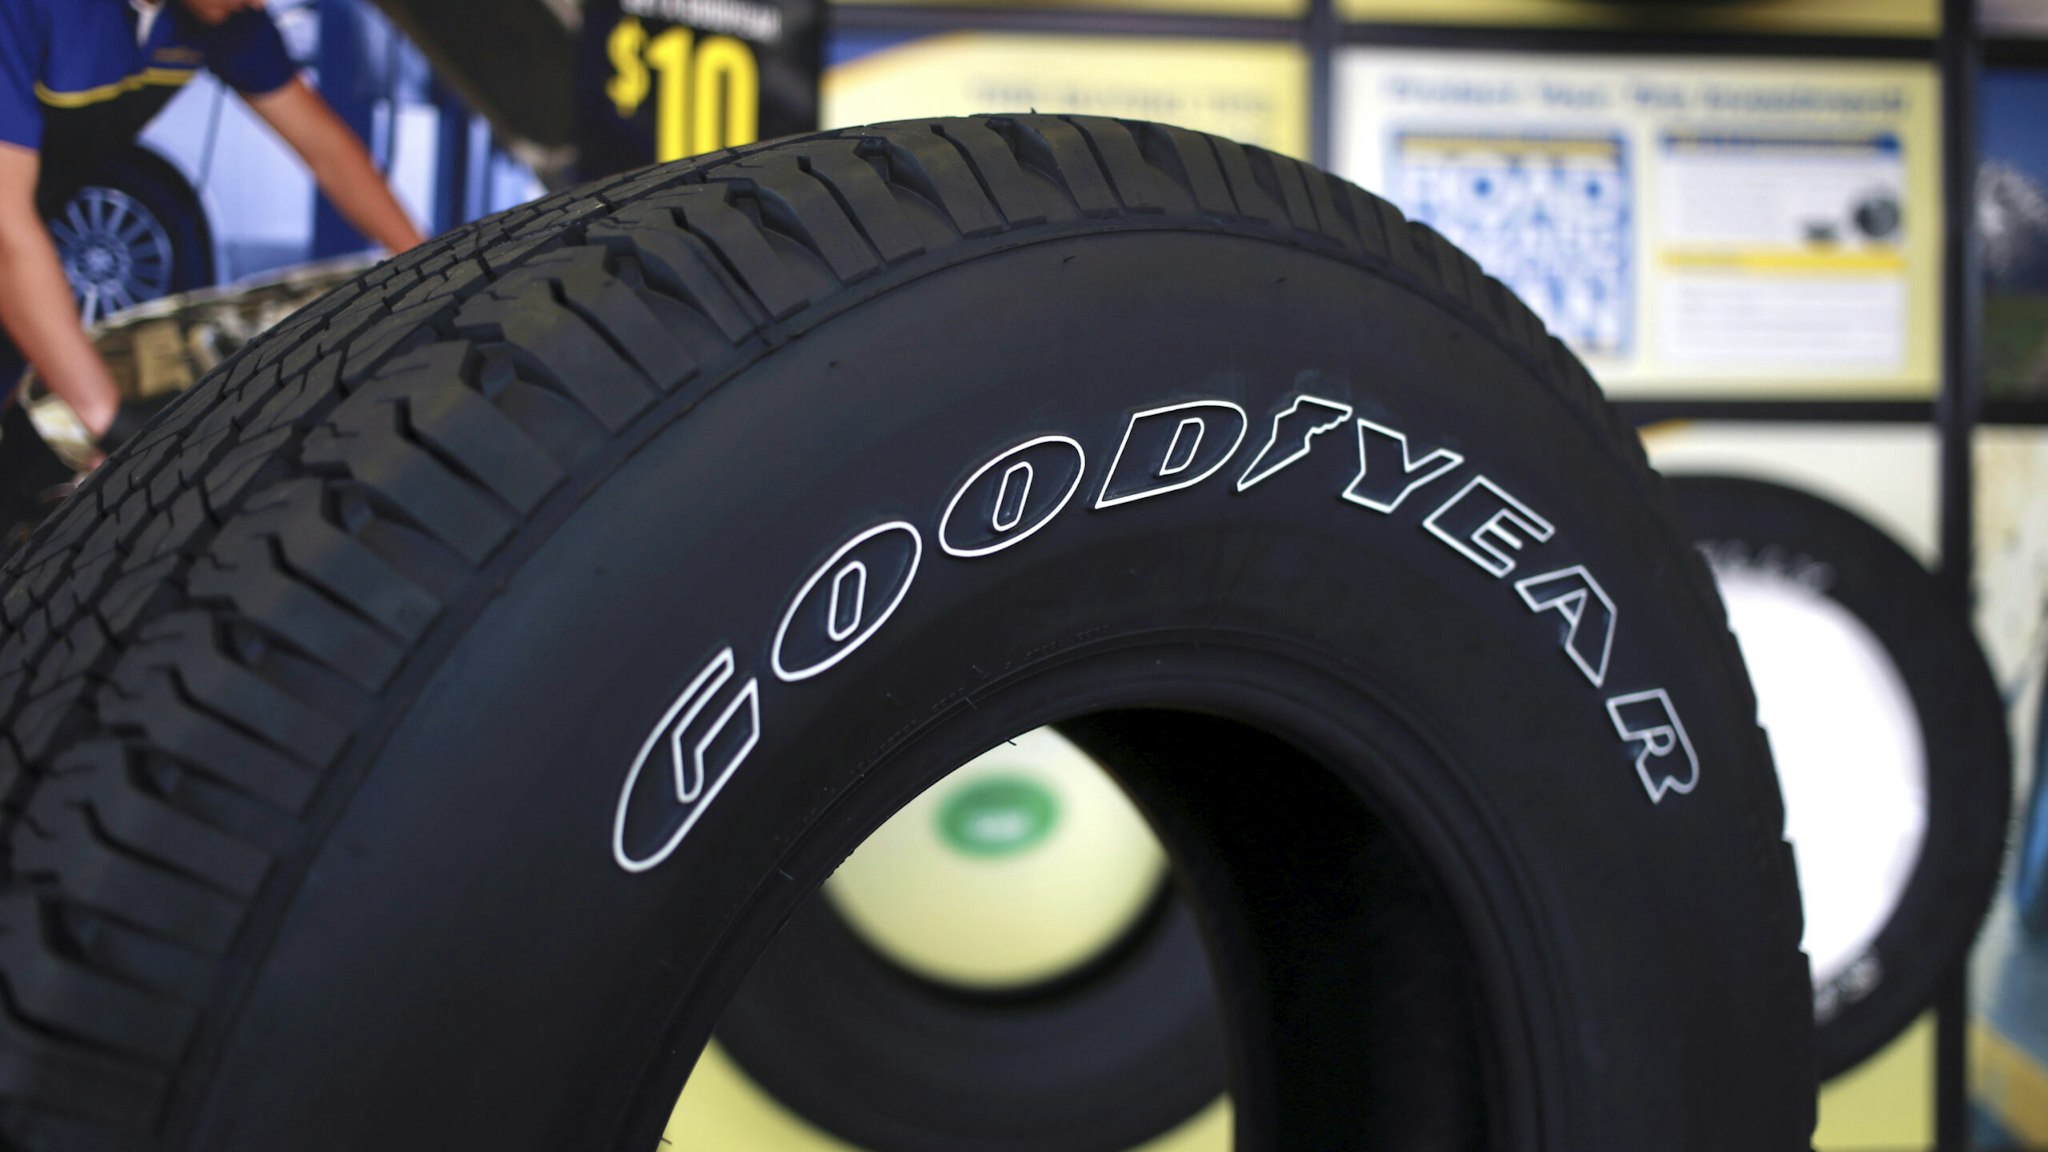 A Goodyear Tire and Rubber Co. brand tire is displayed for sale at one of the company's auto service centers in Millington, Tennessee, U.S., on Tuesday, Feb. 17, 2015. The Goodyear Tire &amp; Rubber Co. reported fourth-quarter sales of $4.48 billion and reaffirmed an earnings growth target of ten to fifteen percent for 2015.